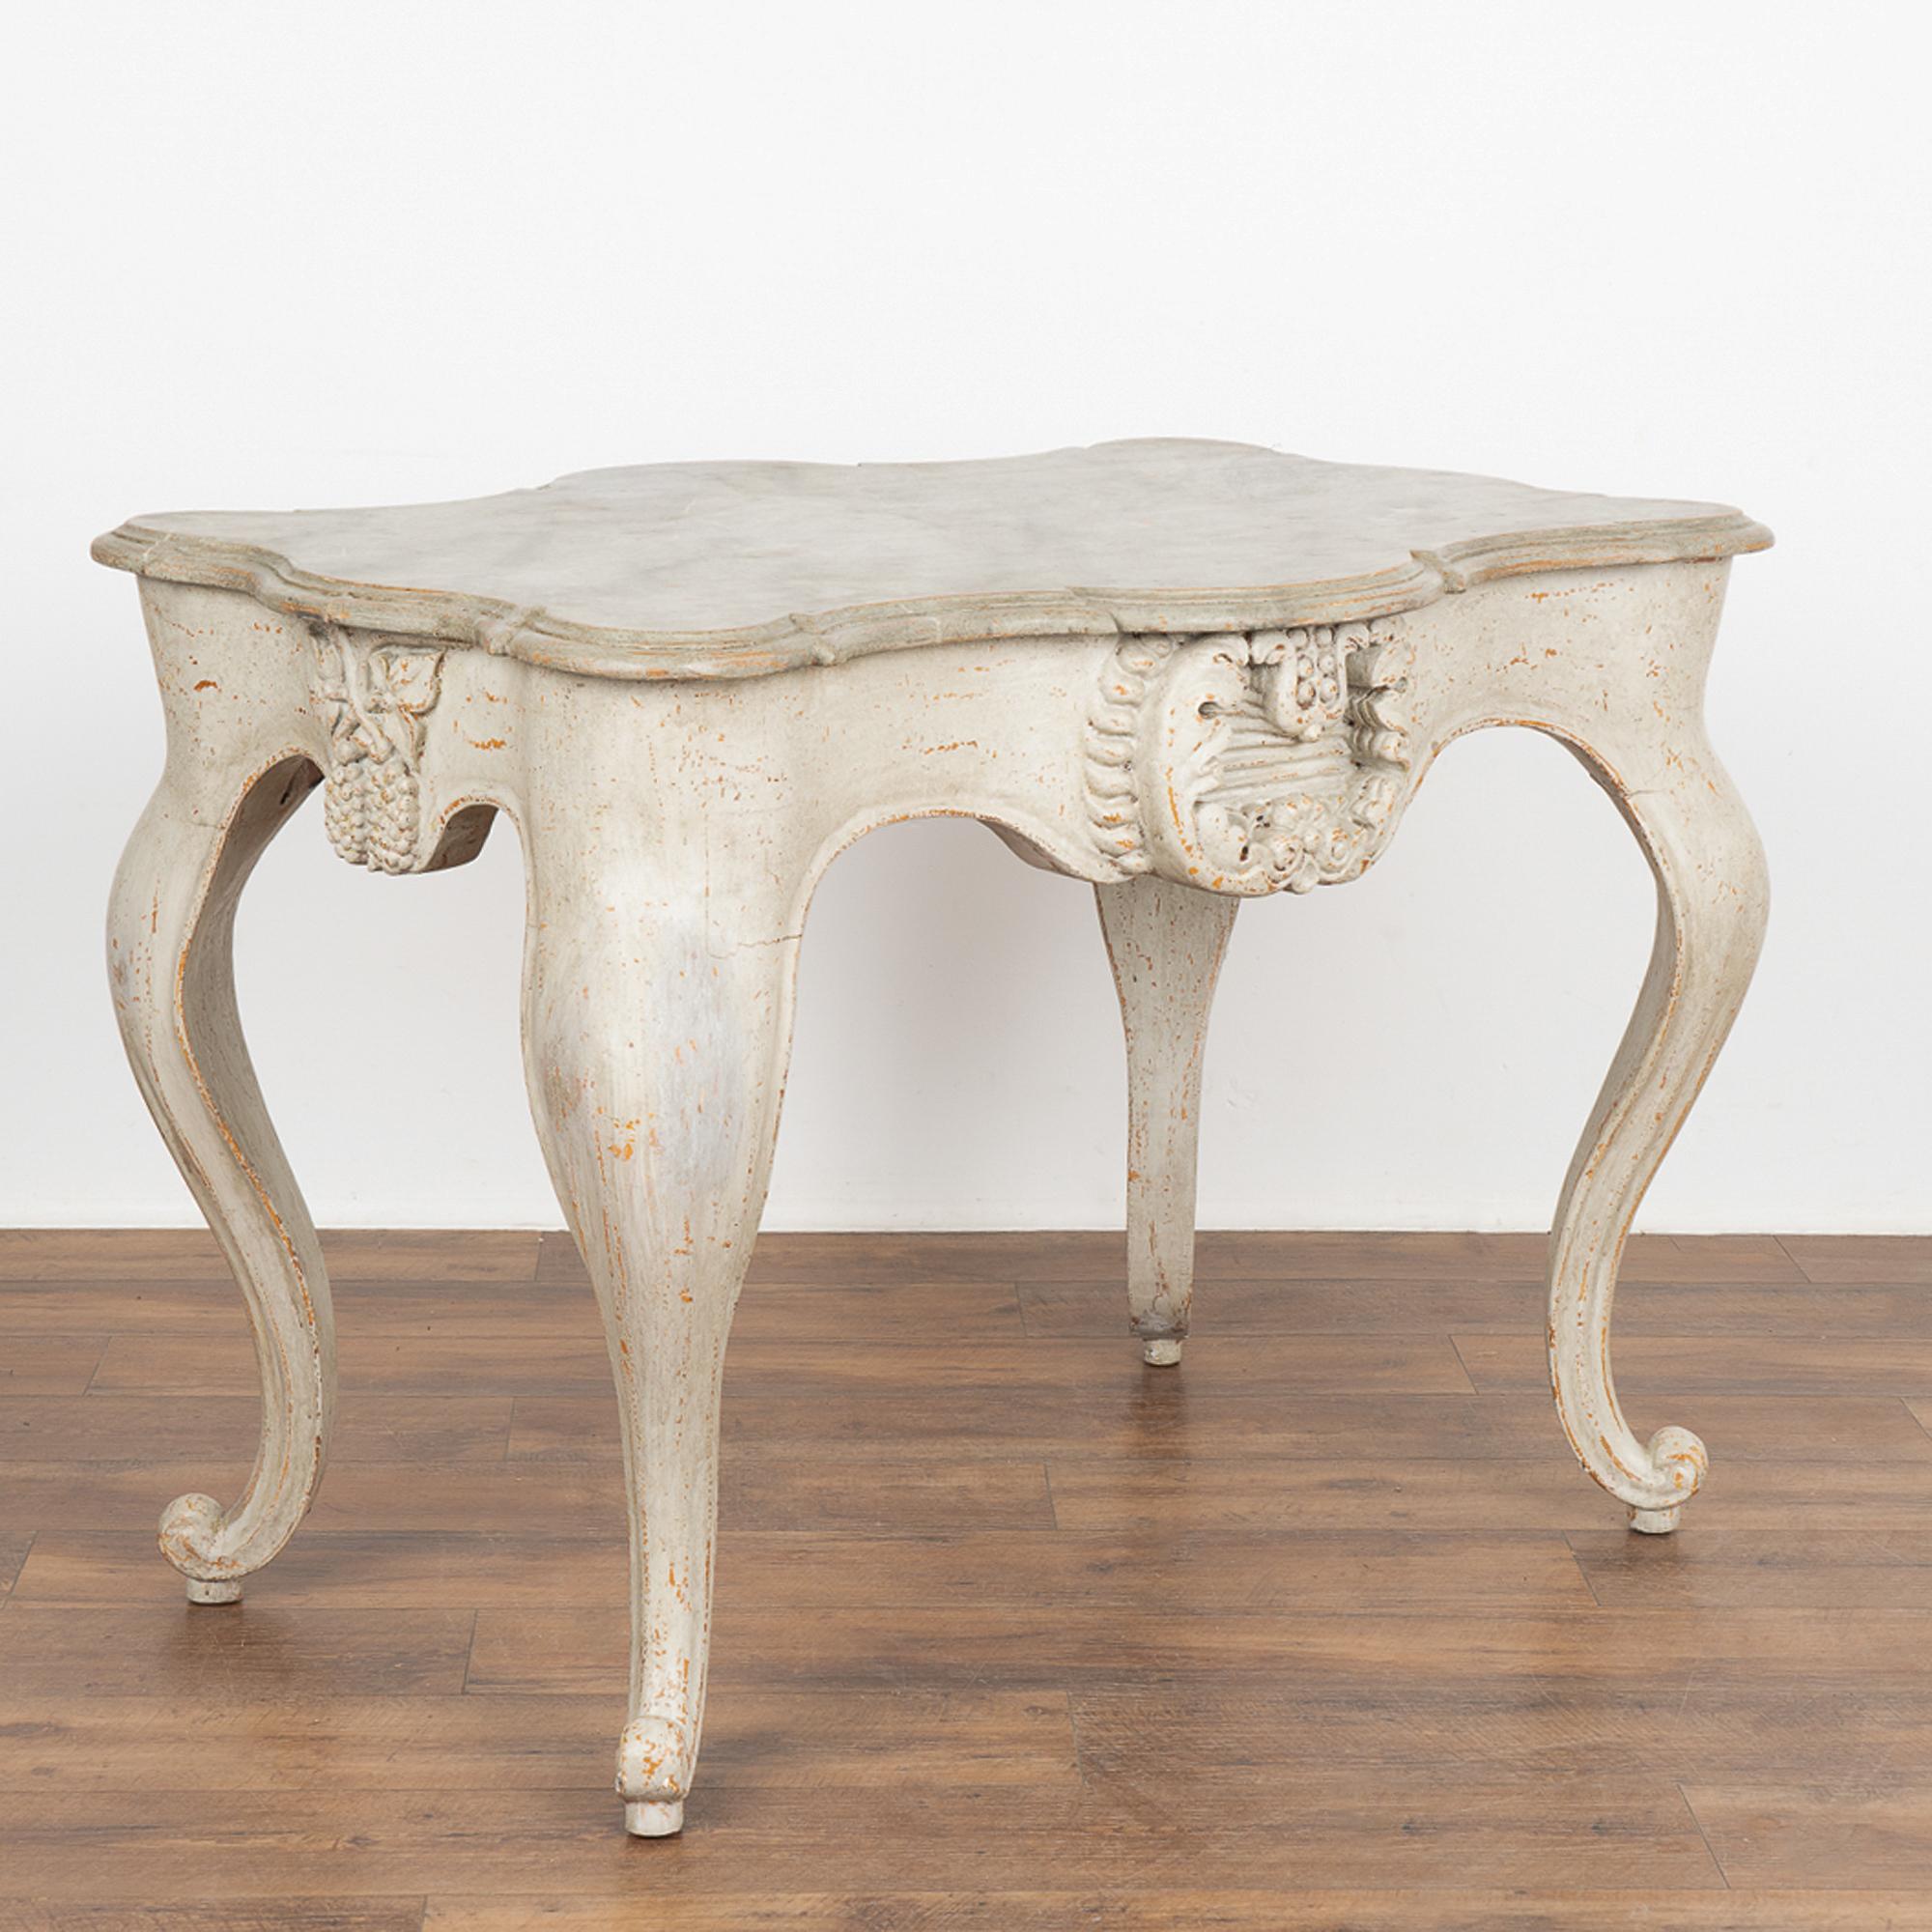 This rococo pine table has dramatic cabriolet legs and heavily carved flourishes that embellish the scalloped skirt. 
The gray painted finish is lightly distressed adding to the aged grace of this striking accent table. The top is painted in